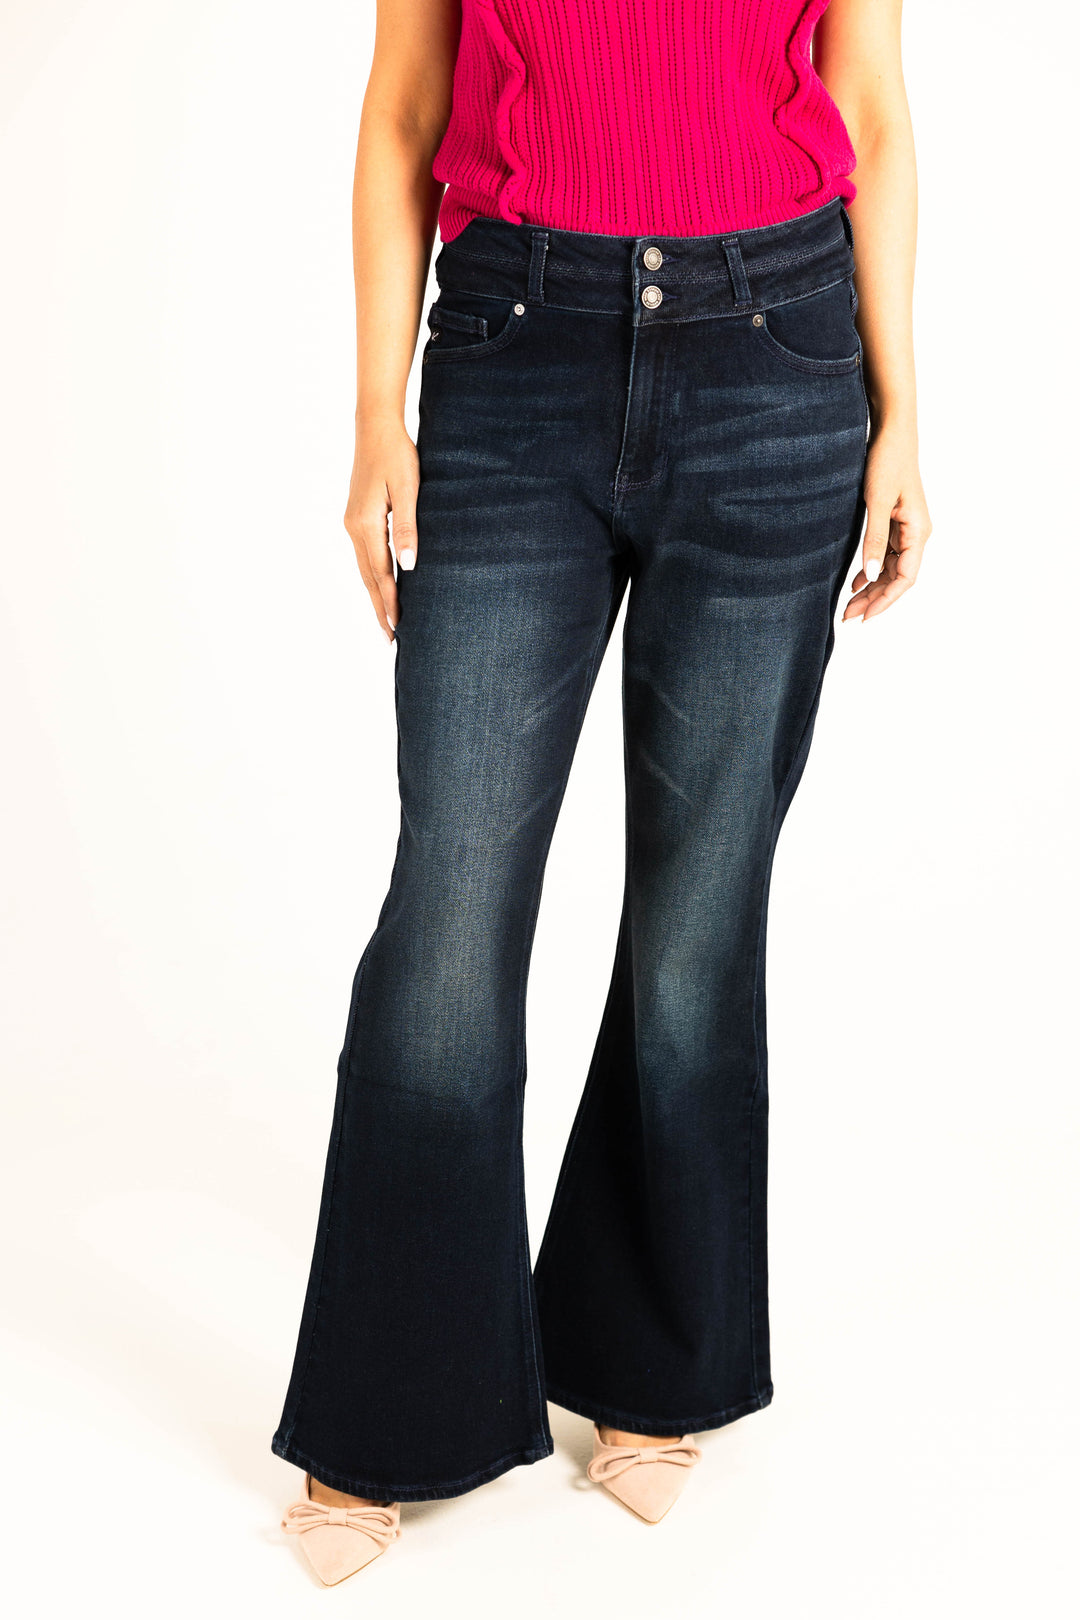 Always on My Mind High Rise Jeans